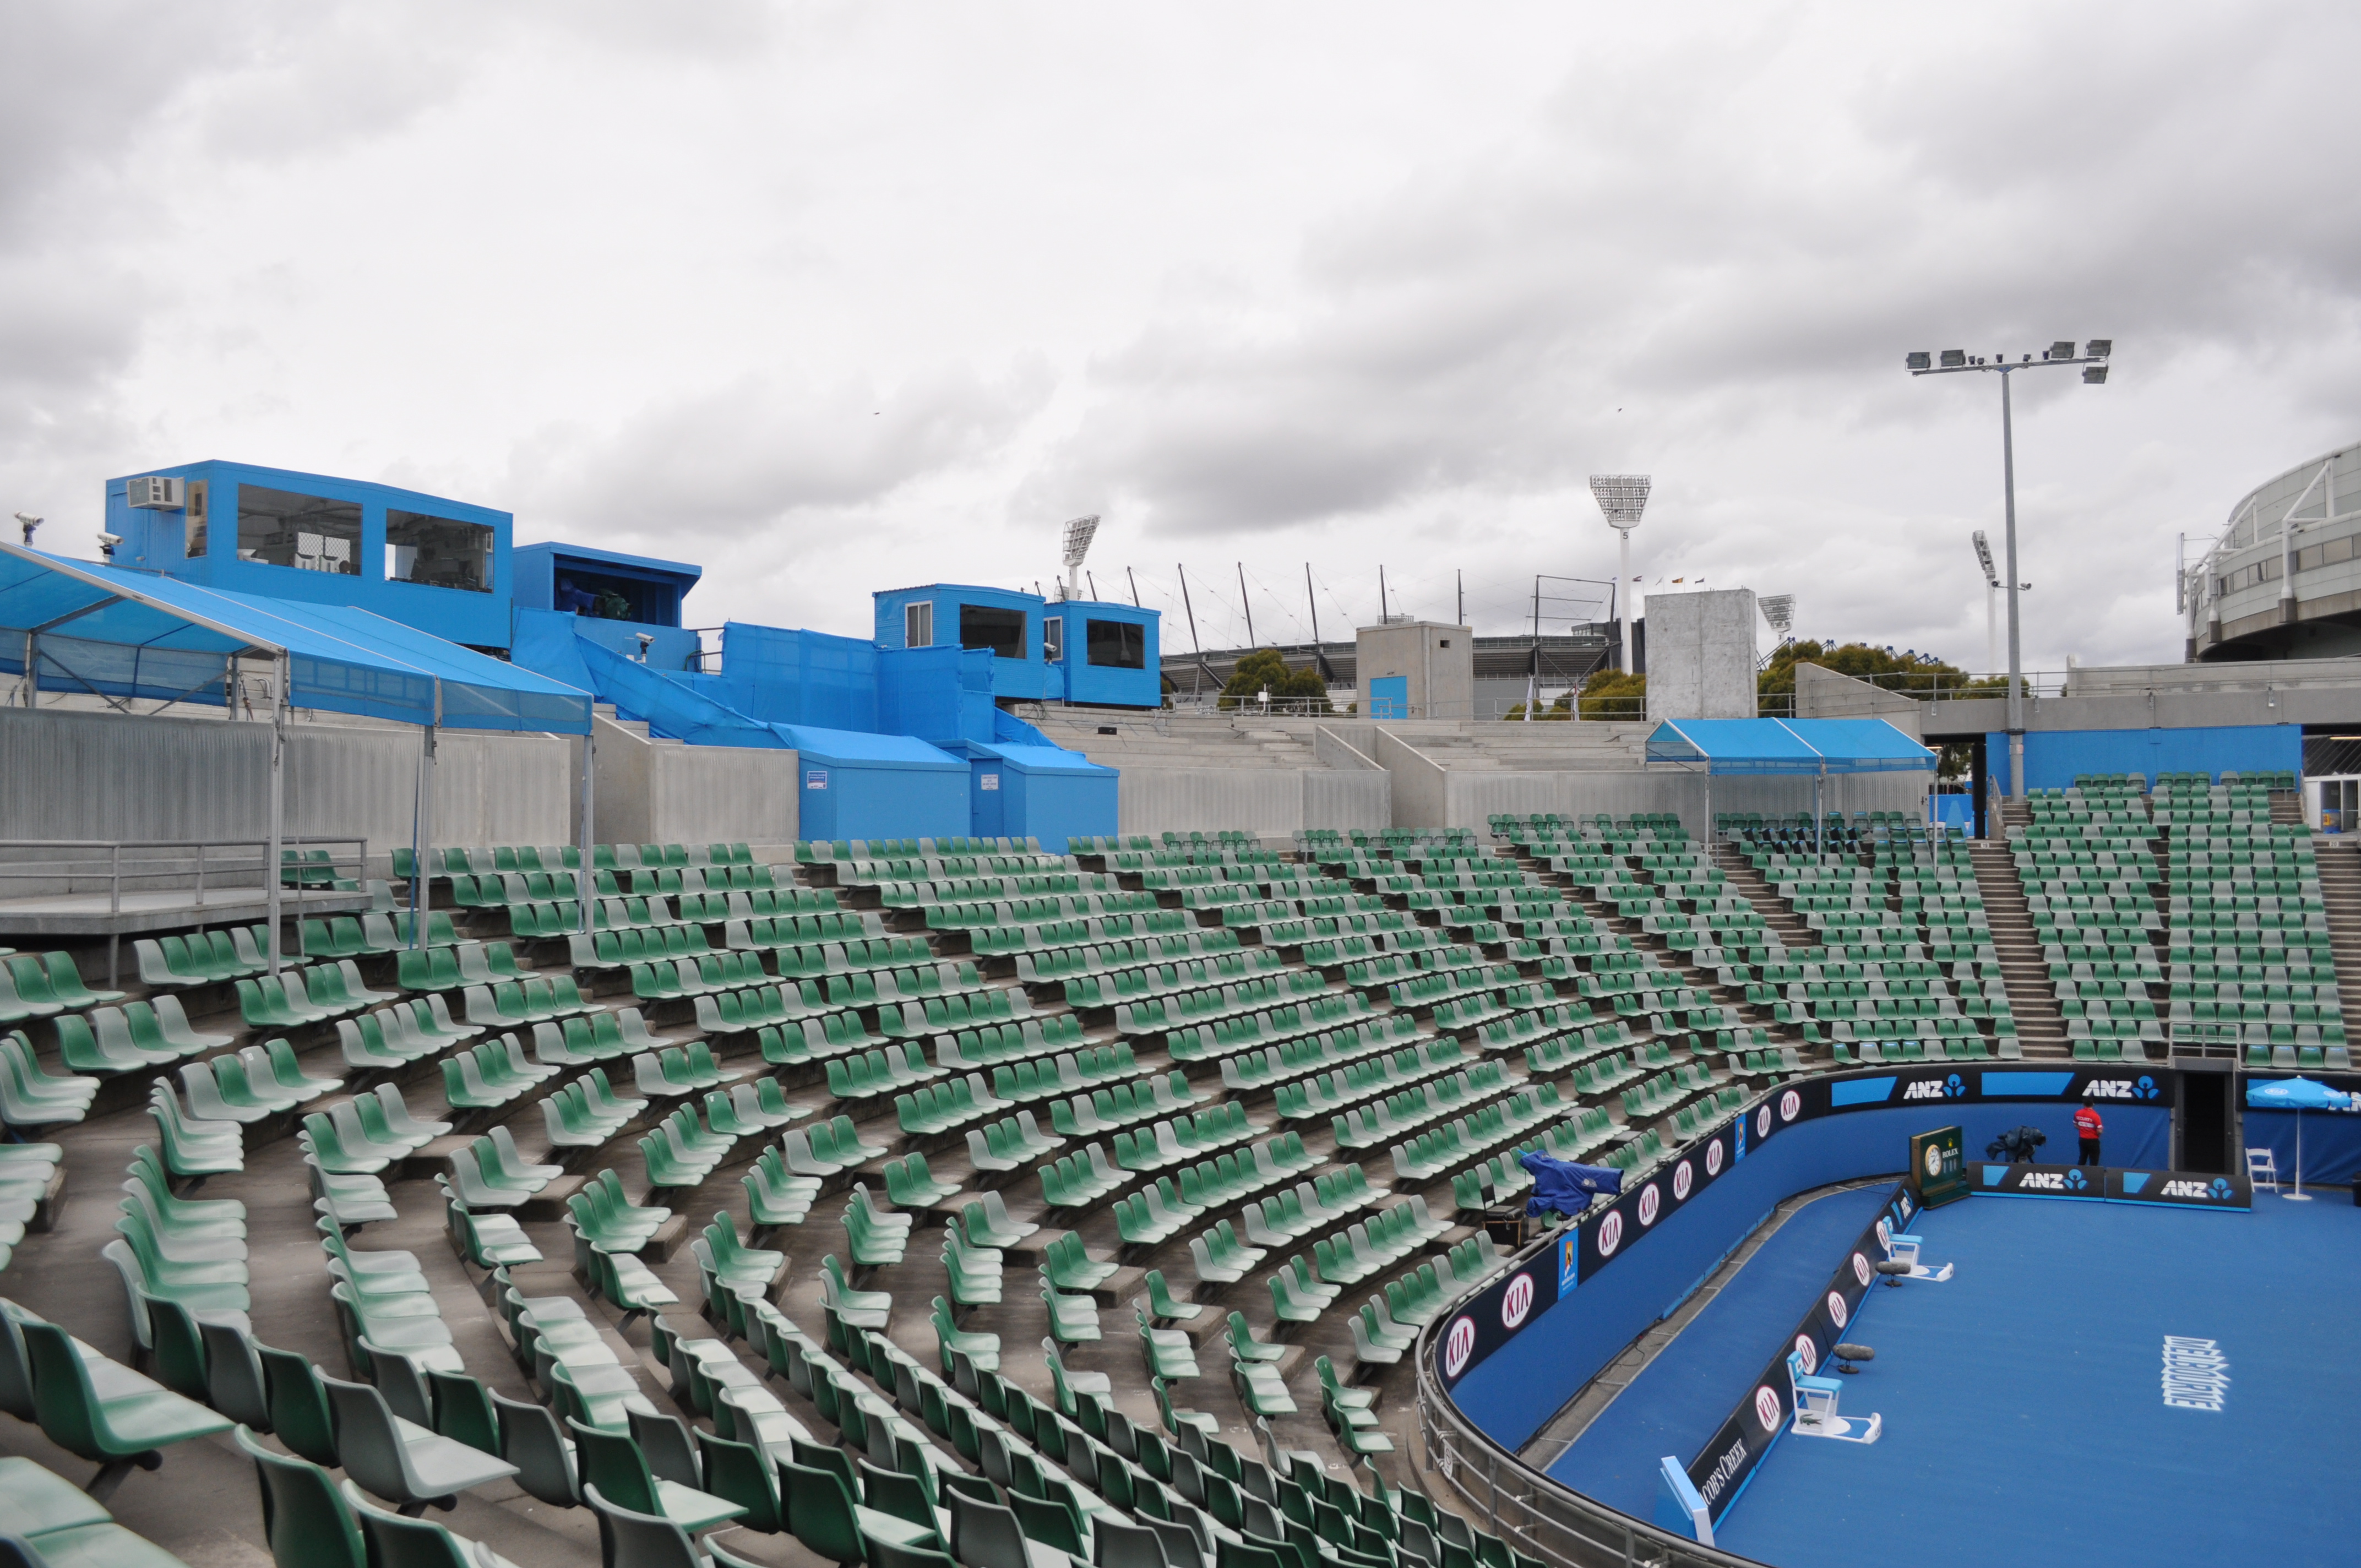 Melbourne Set For Biggest Open Yet From The Sideline